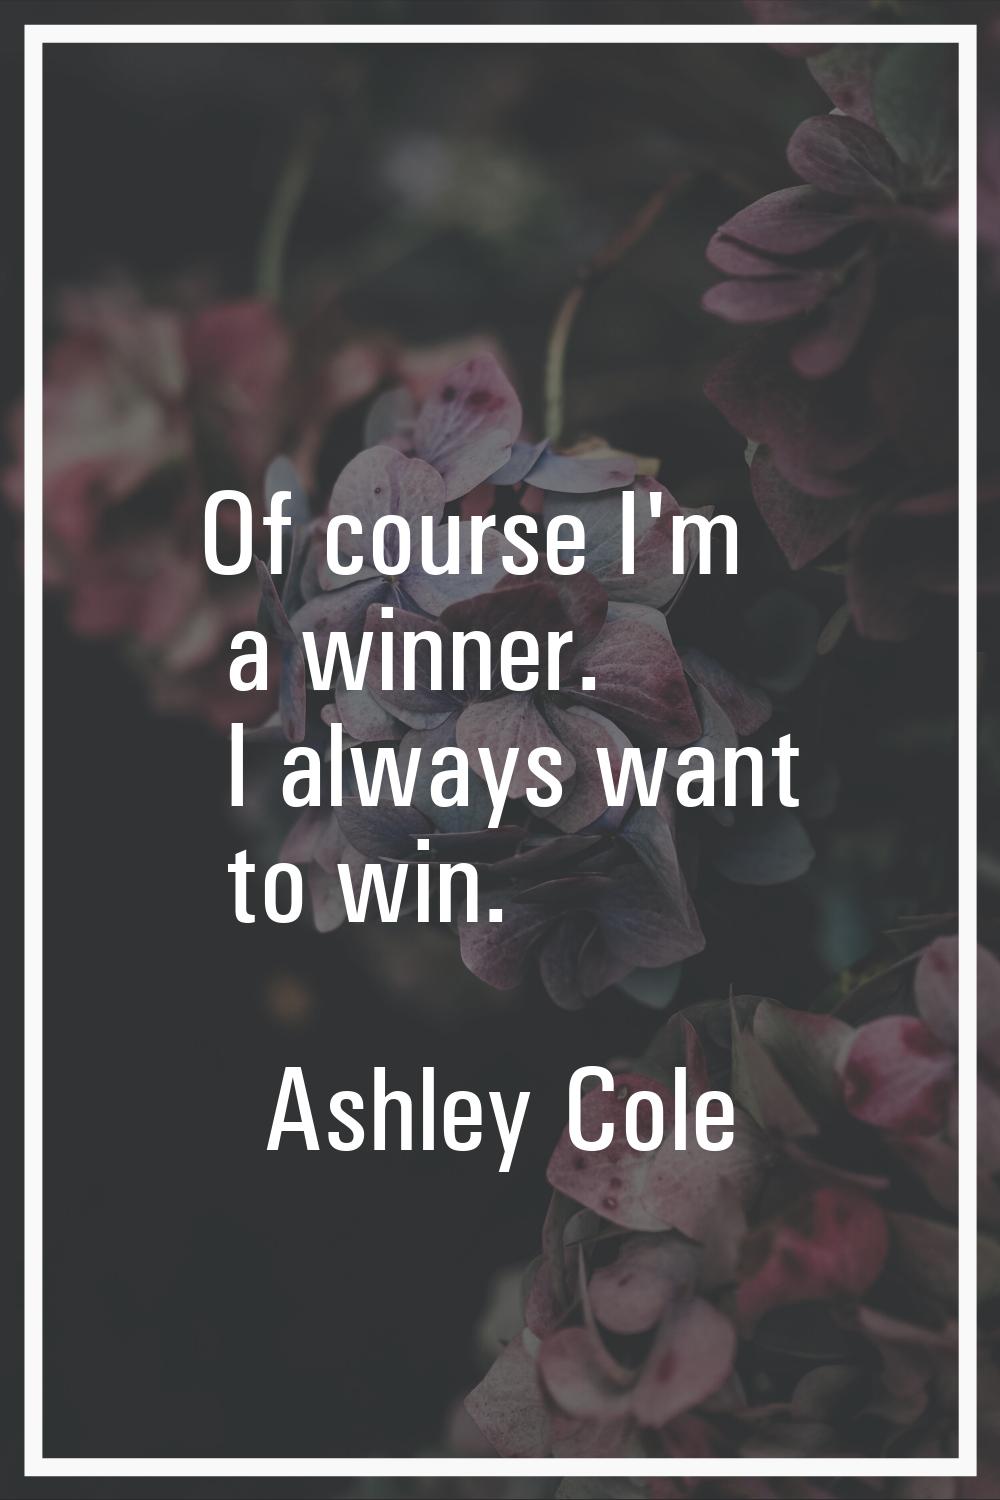 Of course I'm a winner. I always want to win.